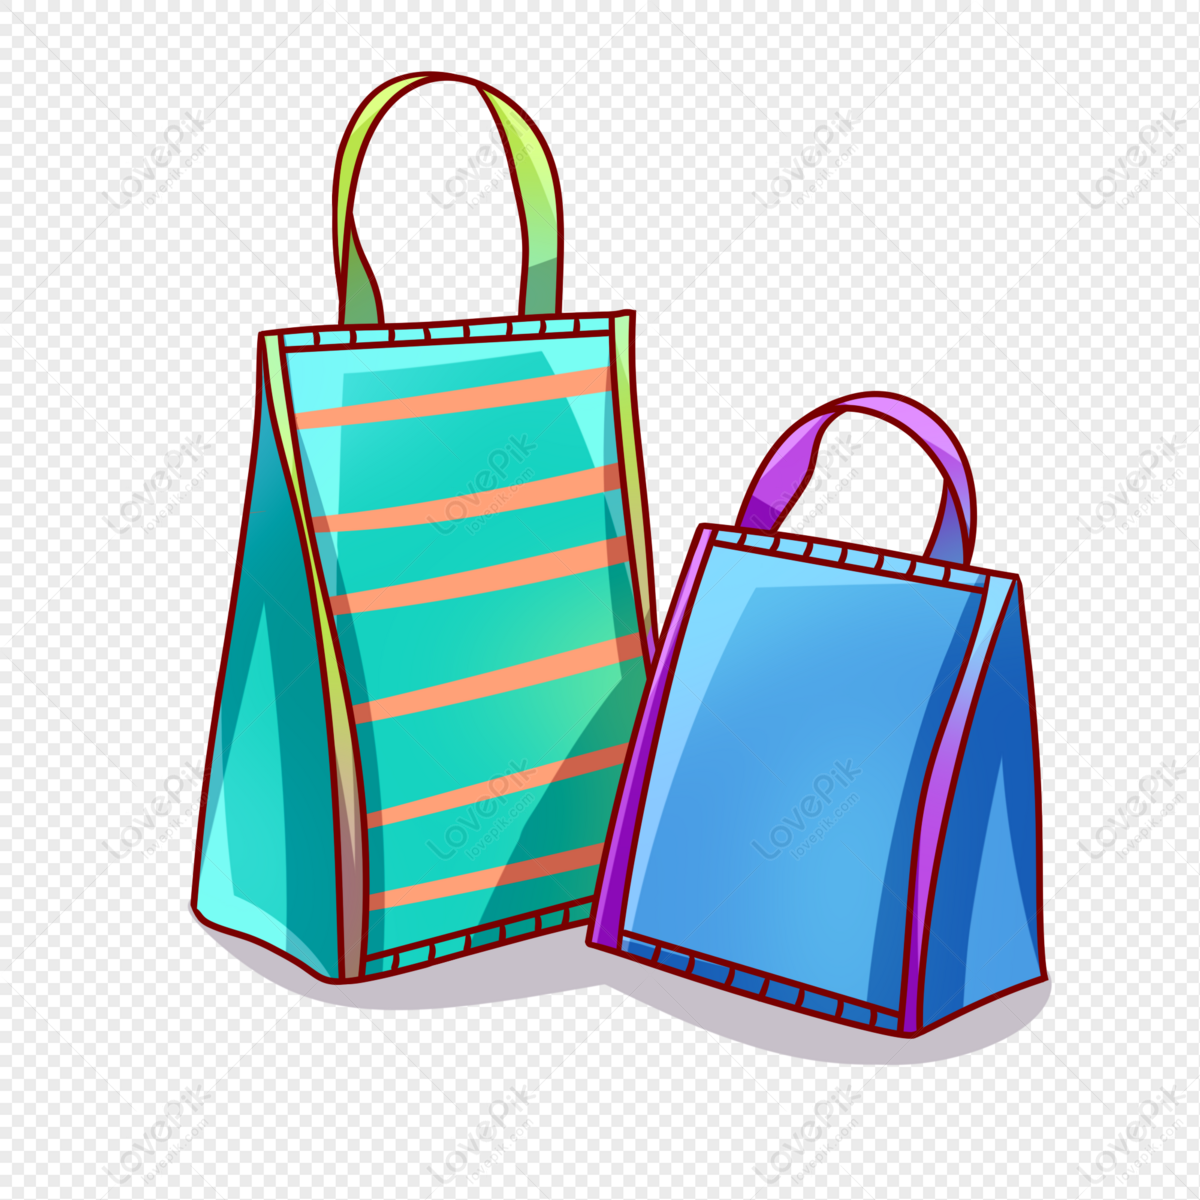 Cartoon Shopping Bag PNG White Transparent And Clipart Image For Free  Download - Lovepik | 401483352